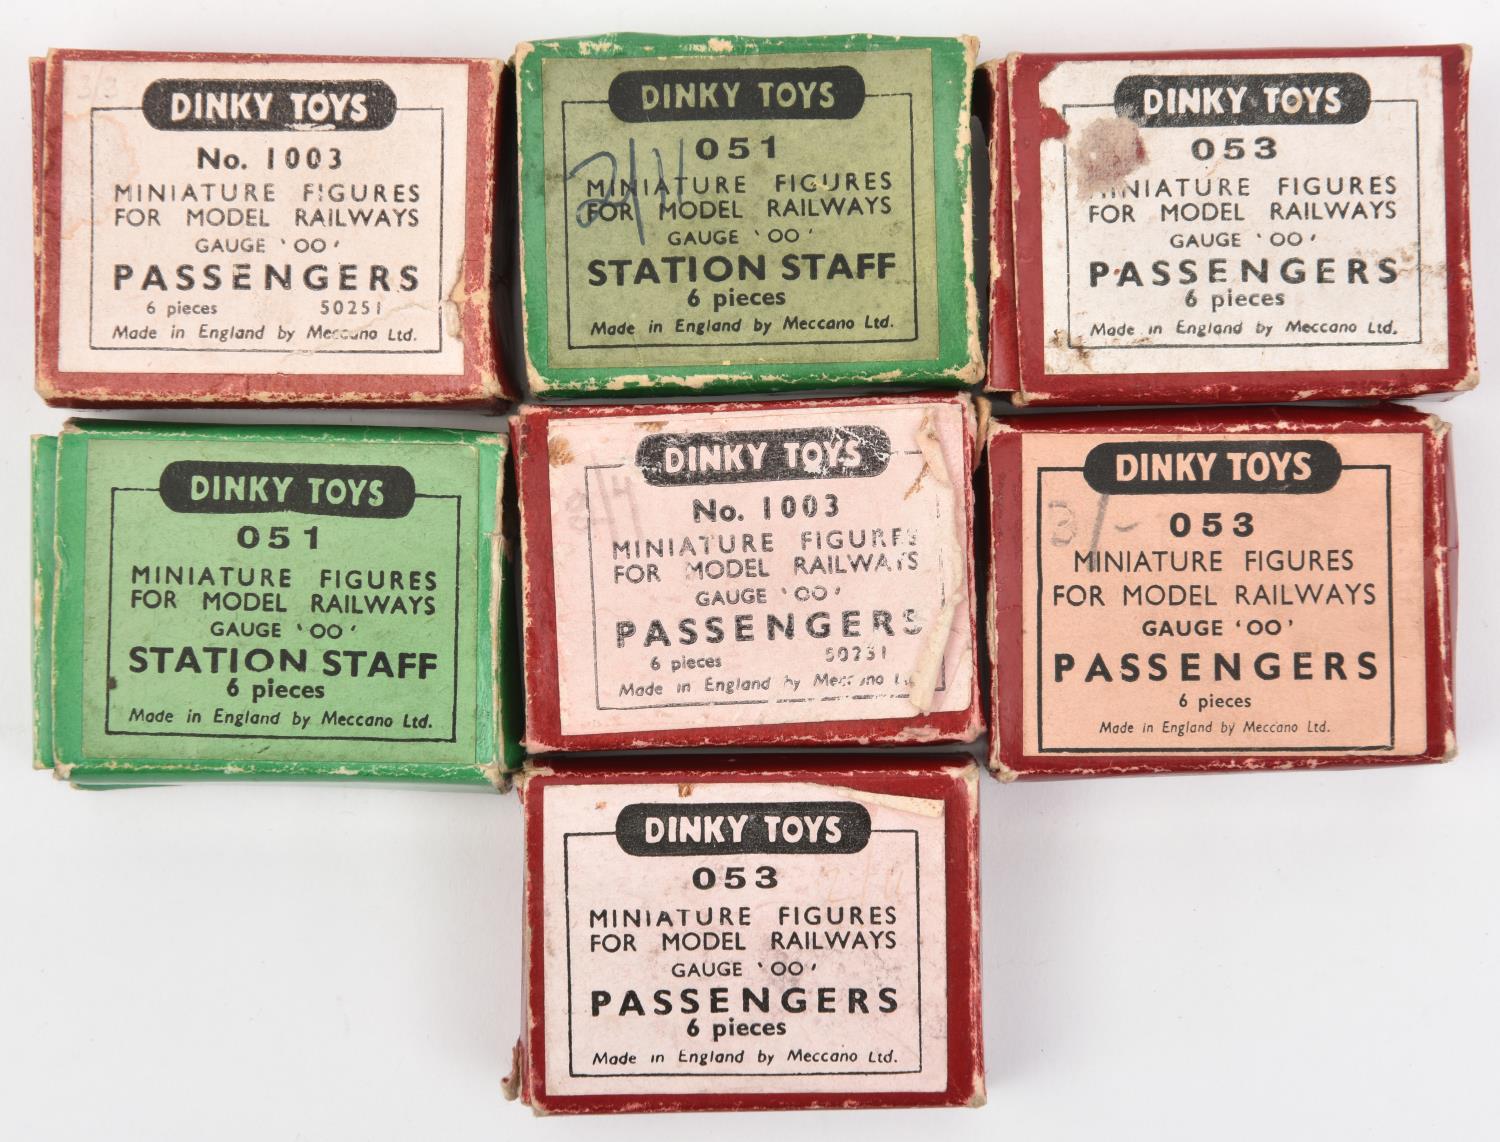 7 Dinky Toys Passengers and Station Staff packs of figures, for use on Hornby Dublo Railway layouts.